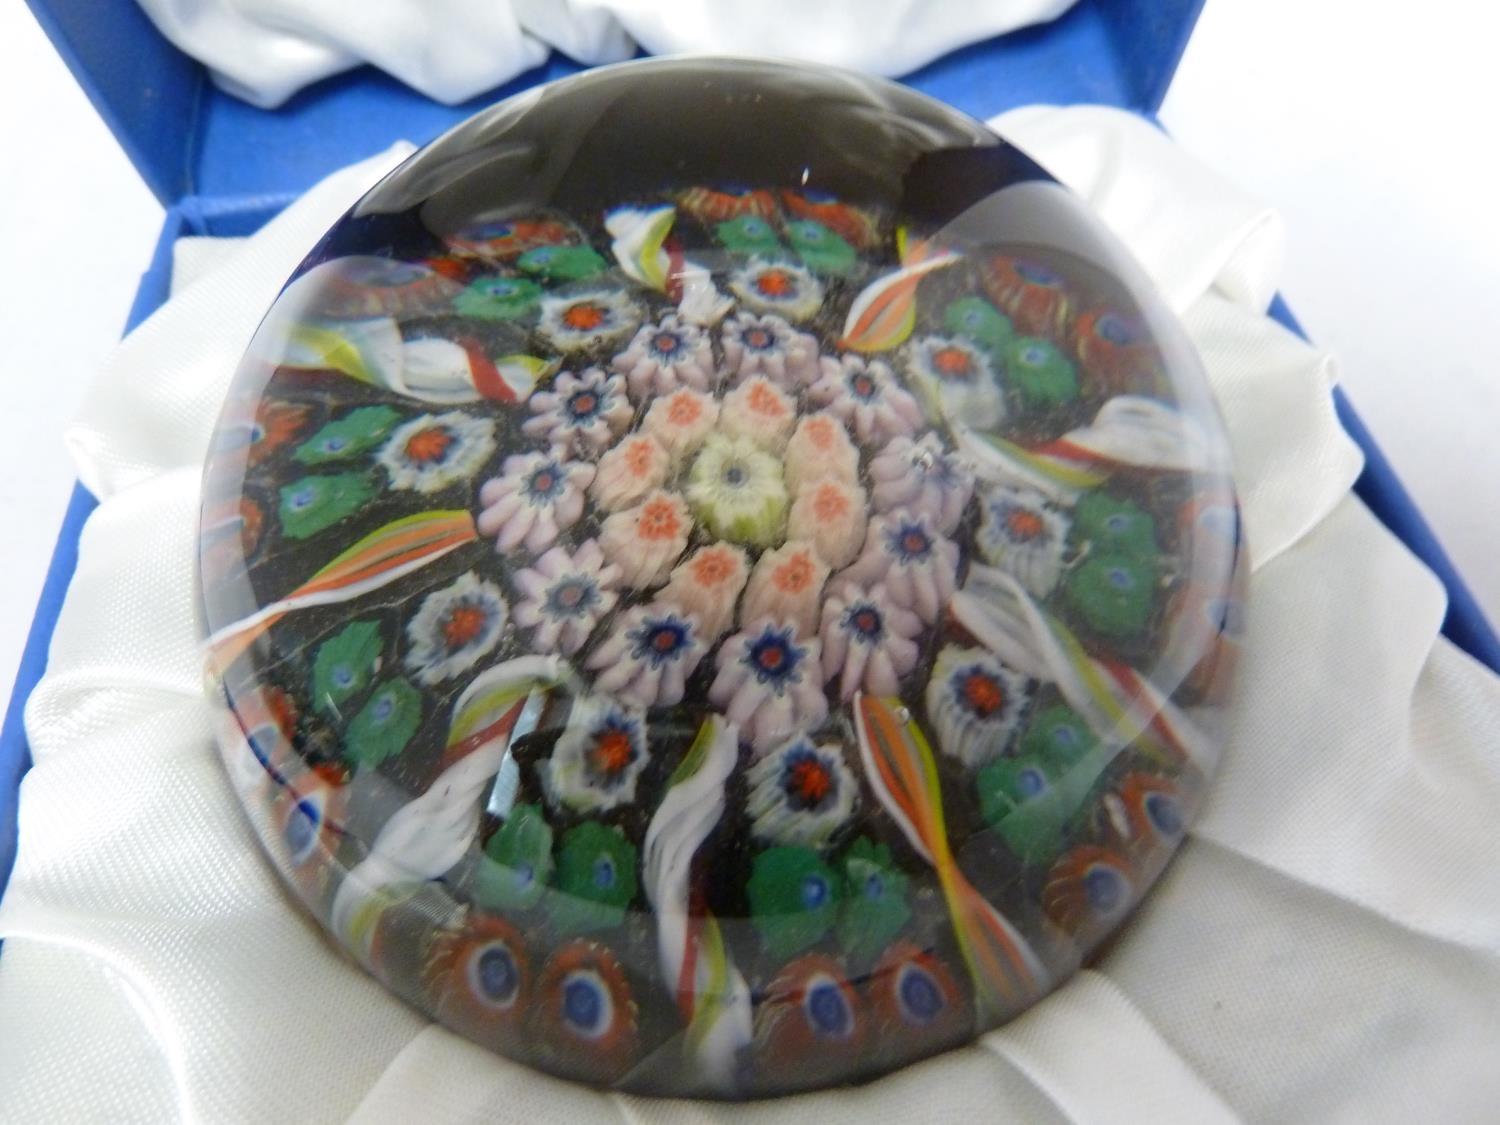 Strathern Glass - a boxed millifiori and barley twist cane glass paperweight; and a Salvador Ysart - Image 3 of 8